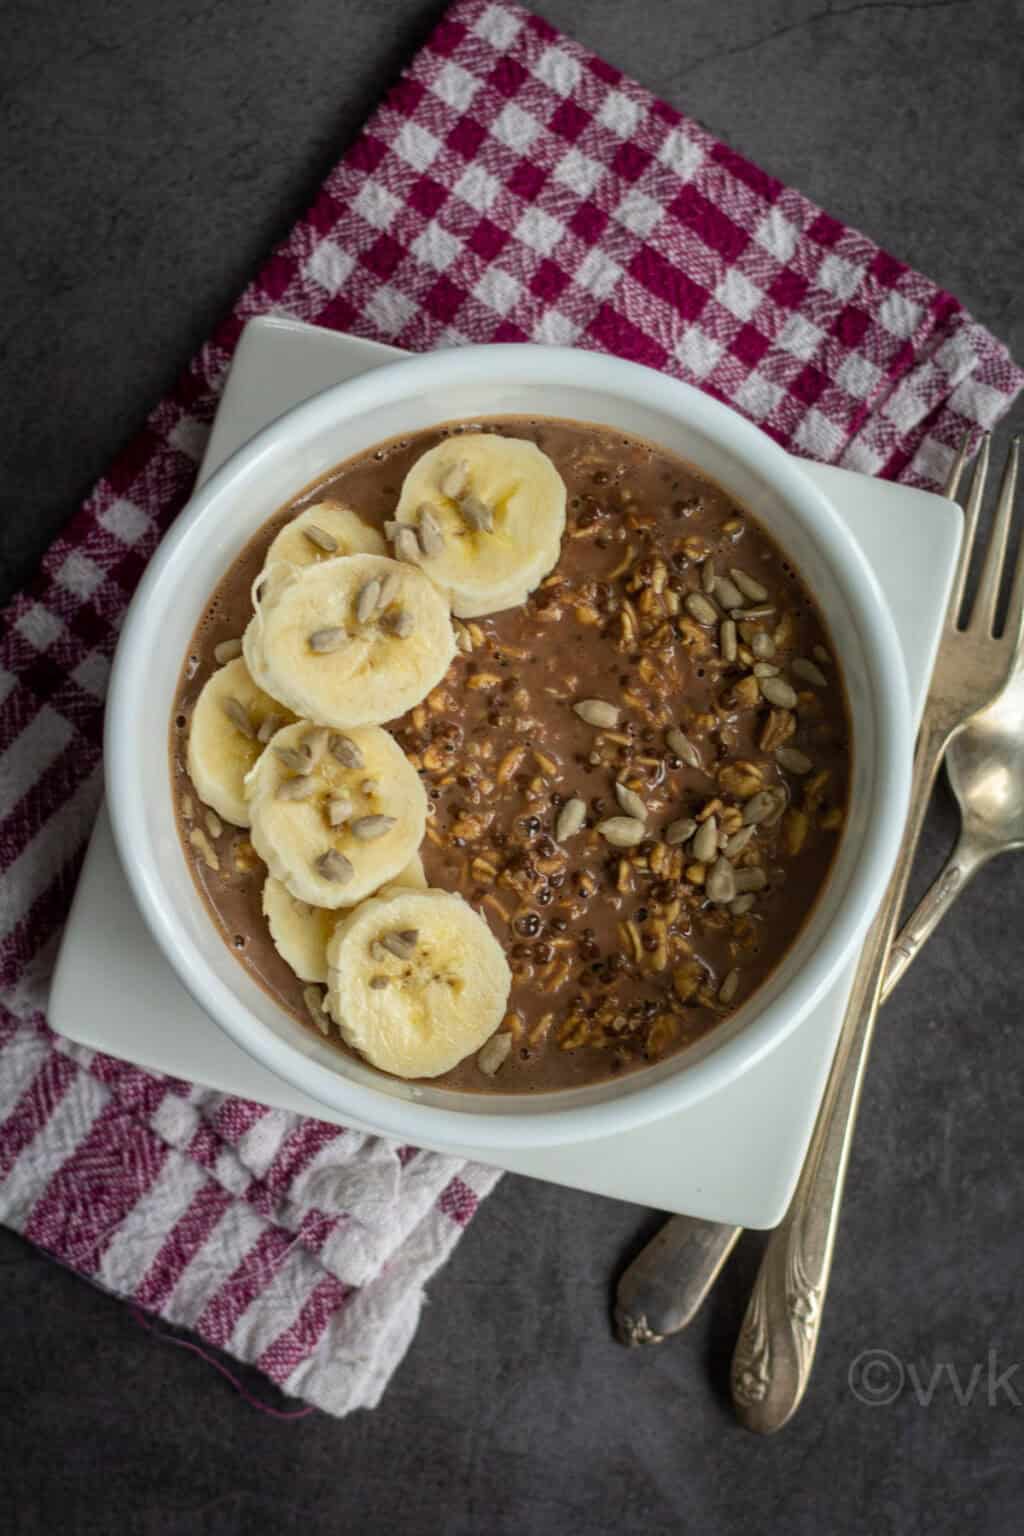 Simple & Delicious Chocolate Peanut Butter Overnight Oats